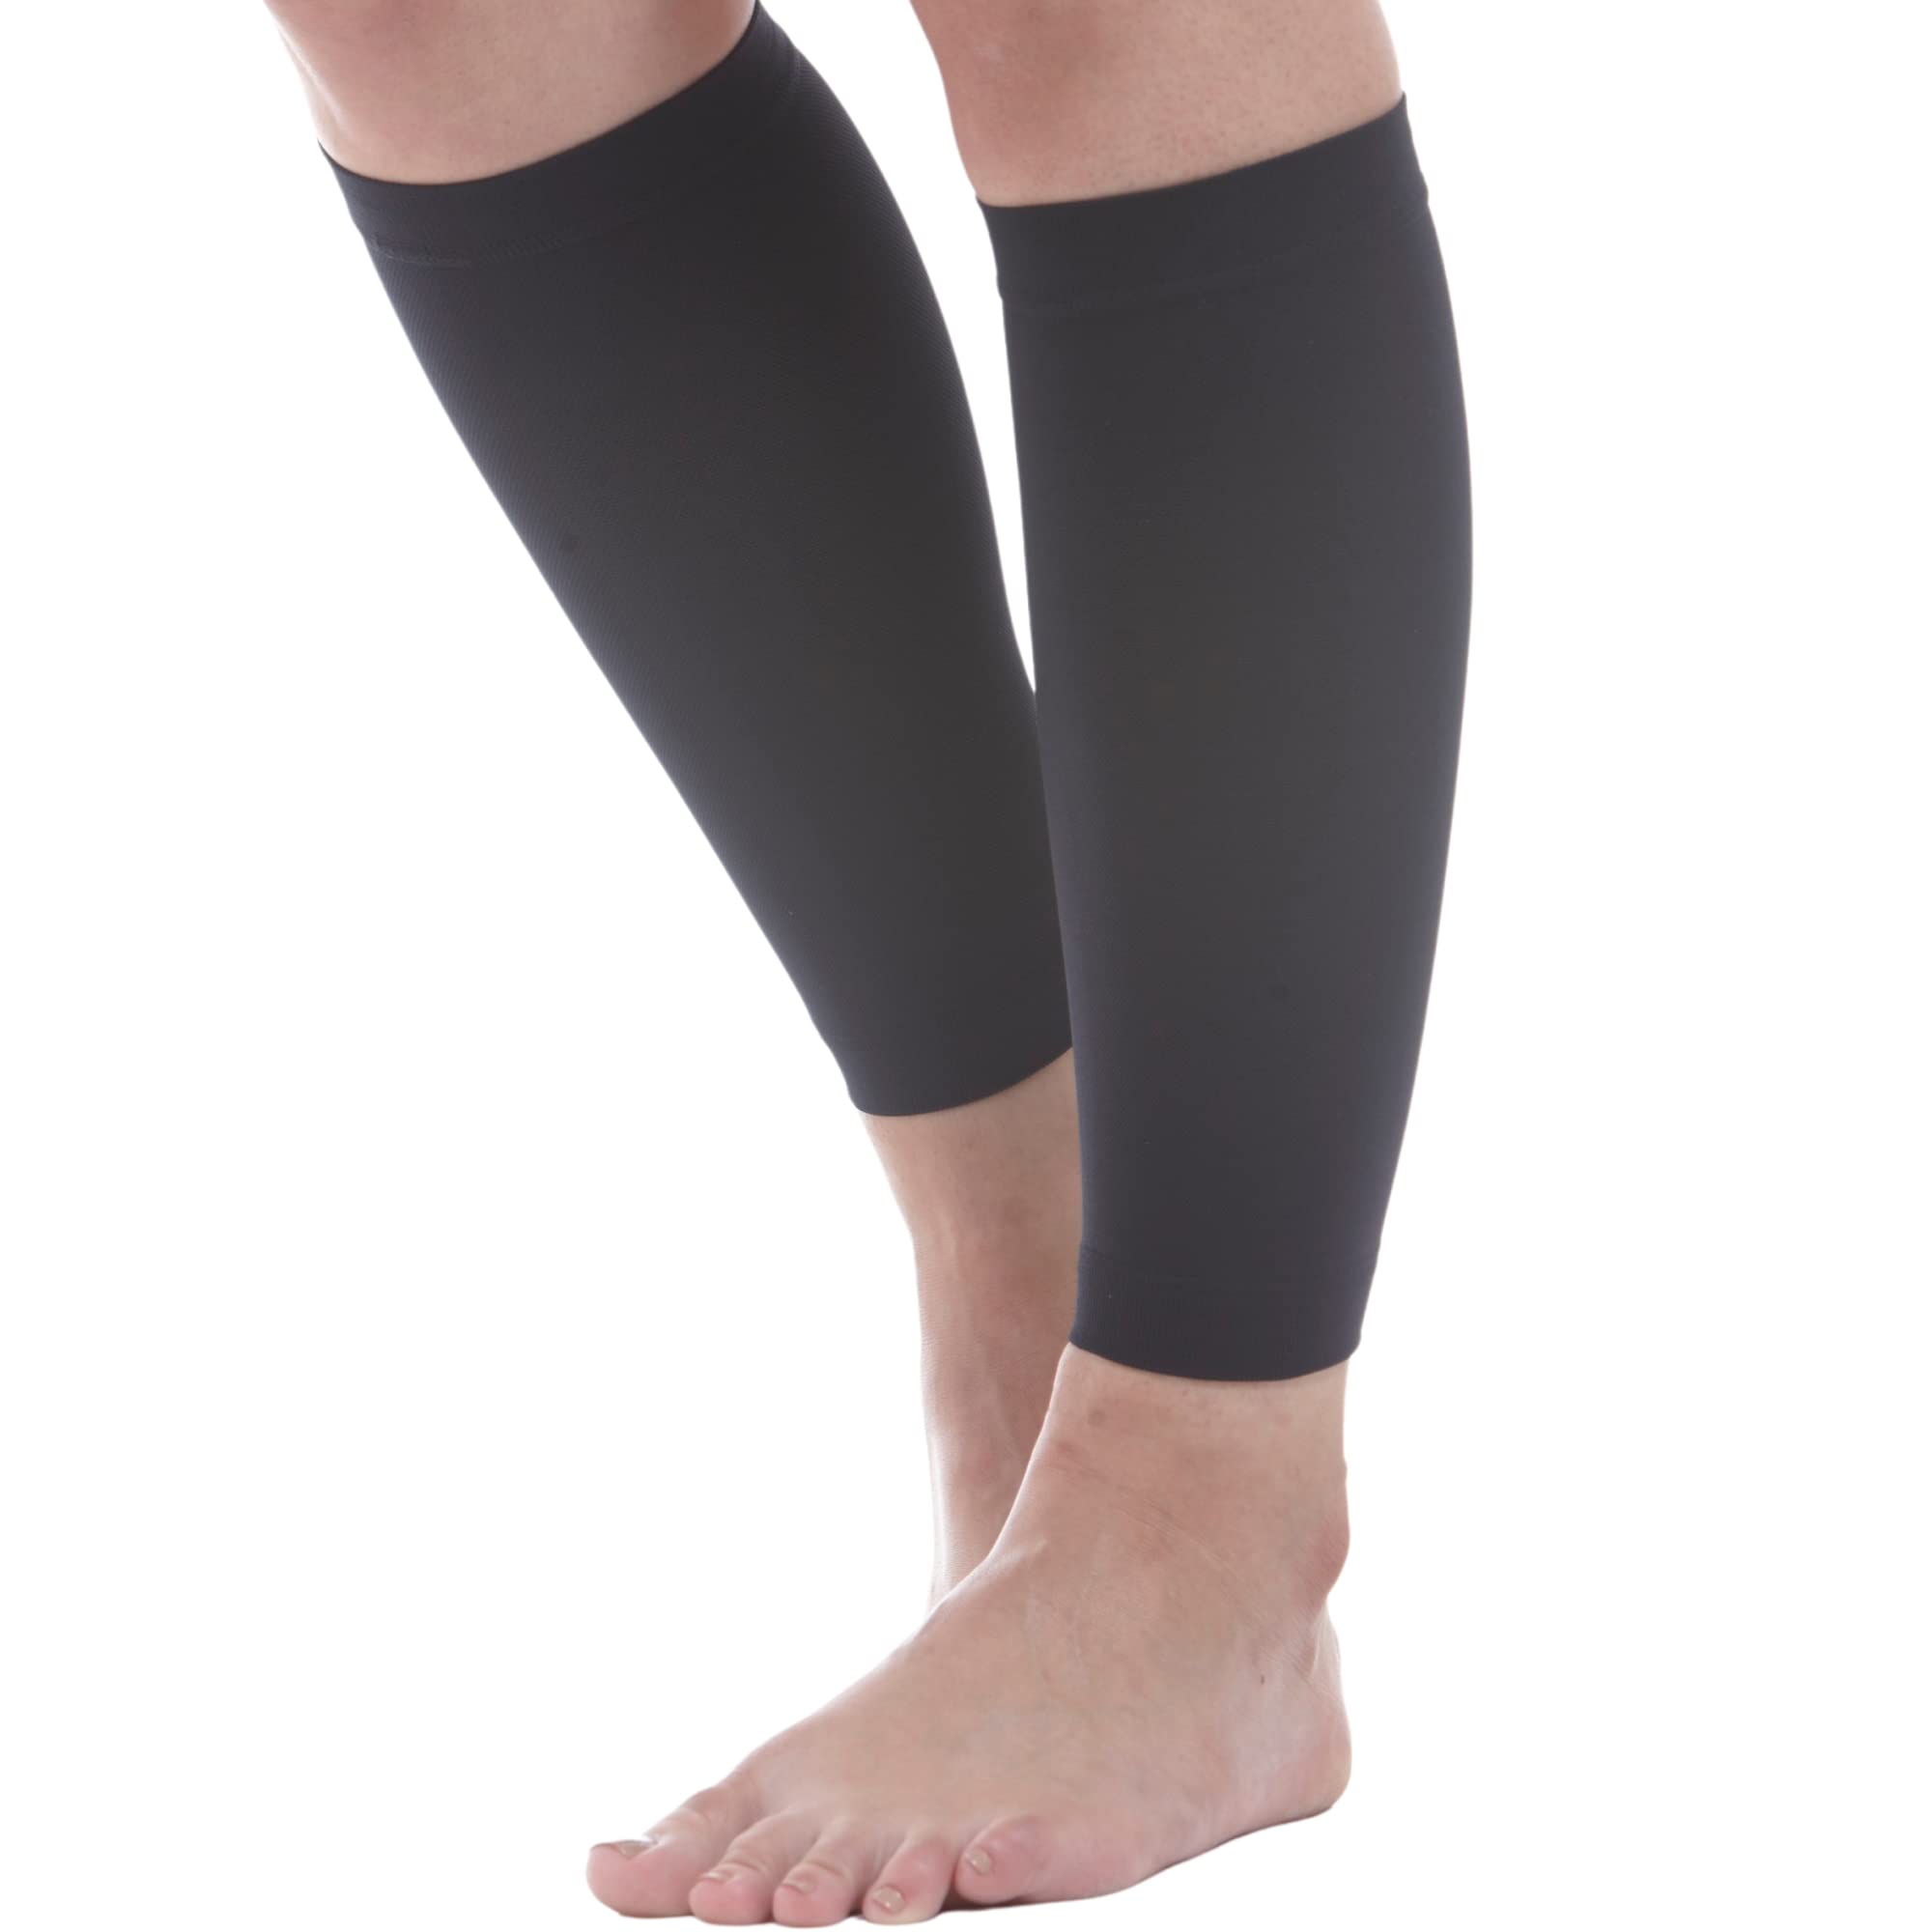 Made in USA - Unisex Compression Calf Sleeves 20-30mmHg for Calf Pain  Relief Running Cycling Nurses Sports - Leg Compression Sleeves for Men and  Women Post Surgery Edema Diabetic - Black, X-Large